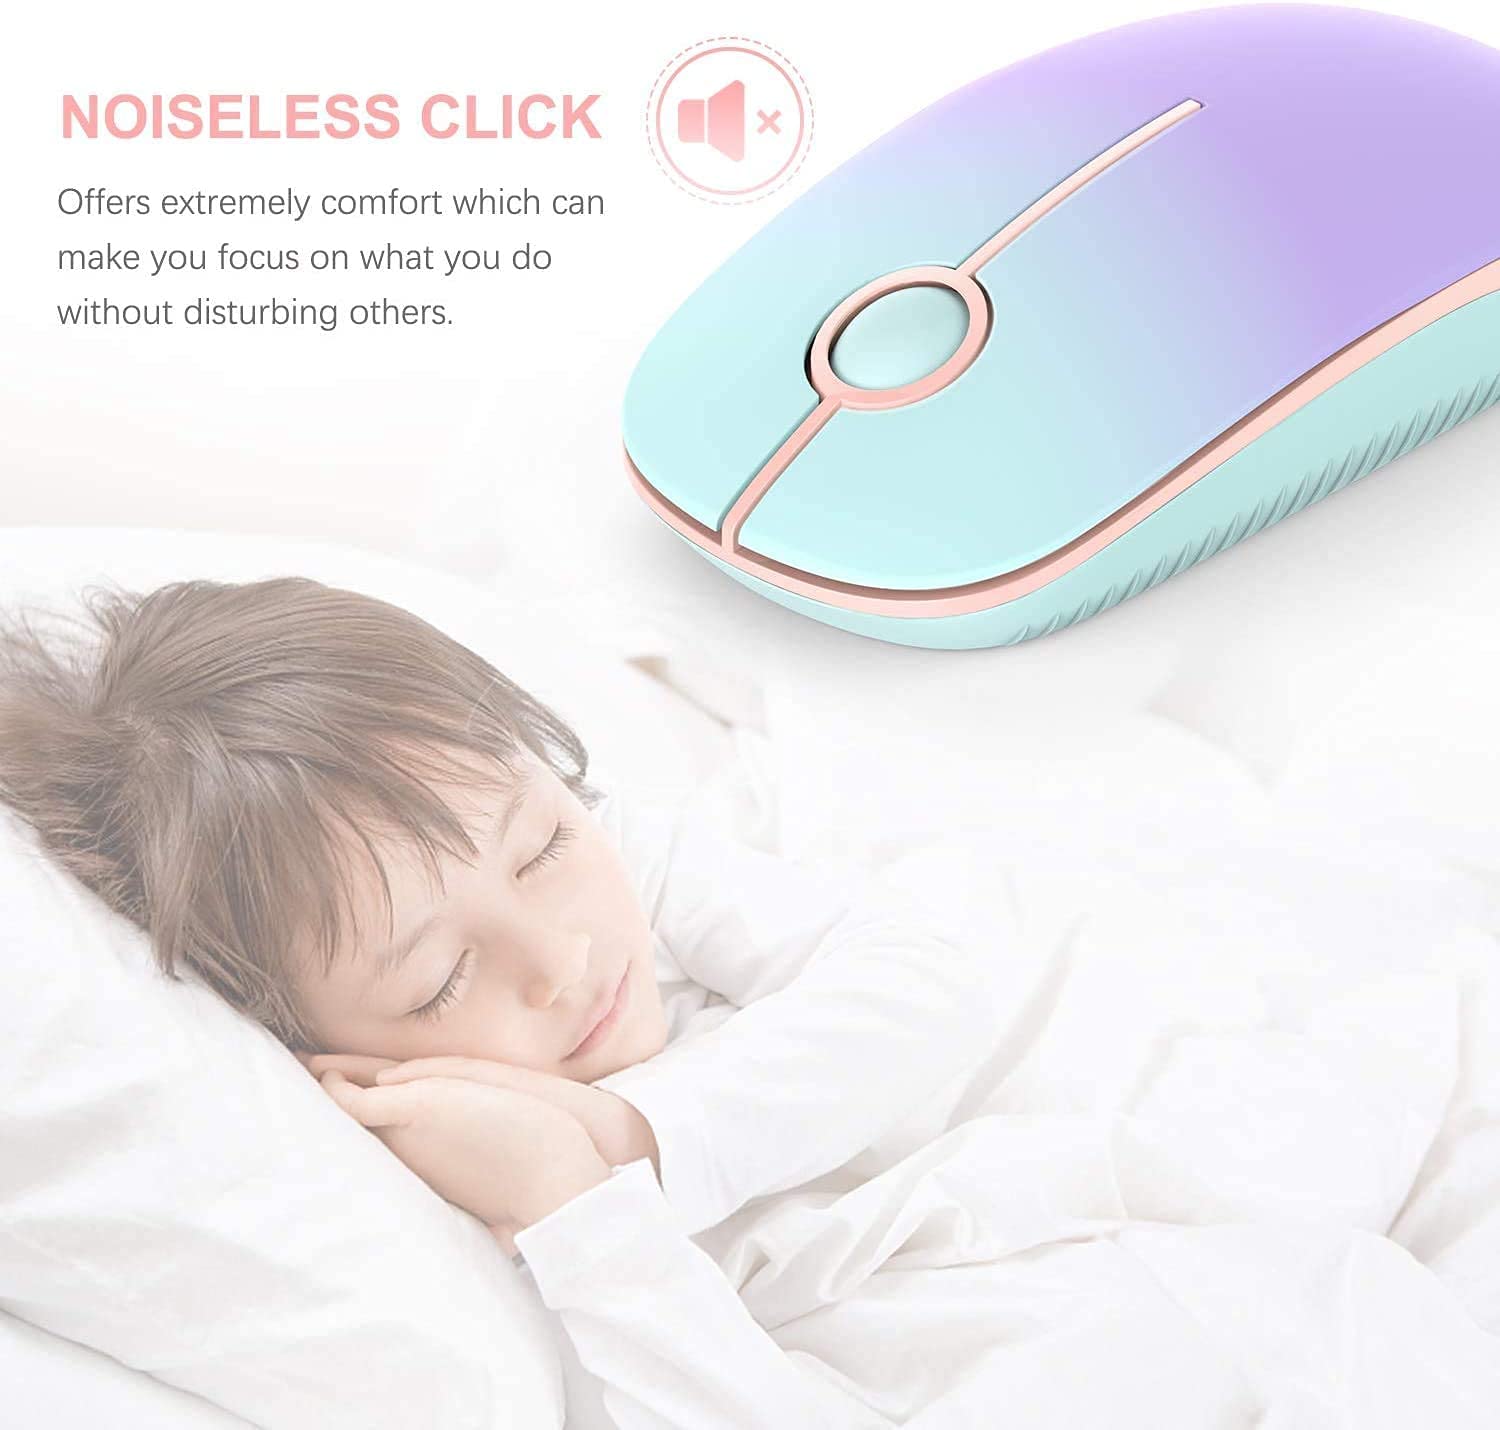 2.4G Slim Wireless Mouse with Nano Receiver, Optical Mice (Mint Green to Purple).  (NC)